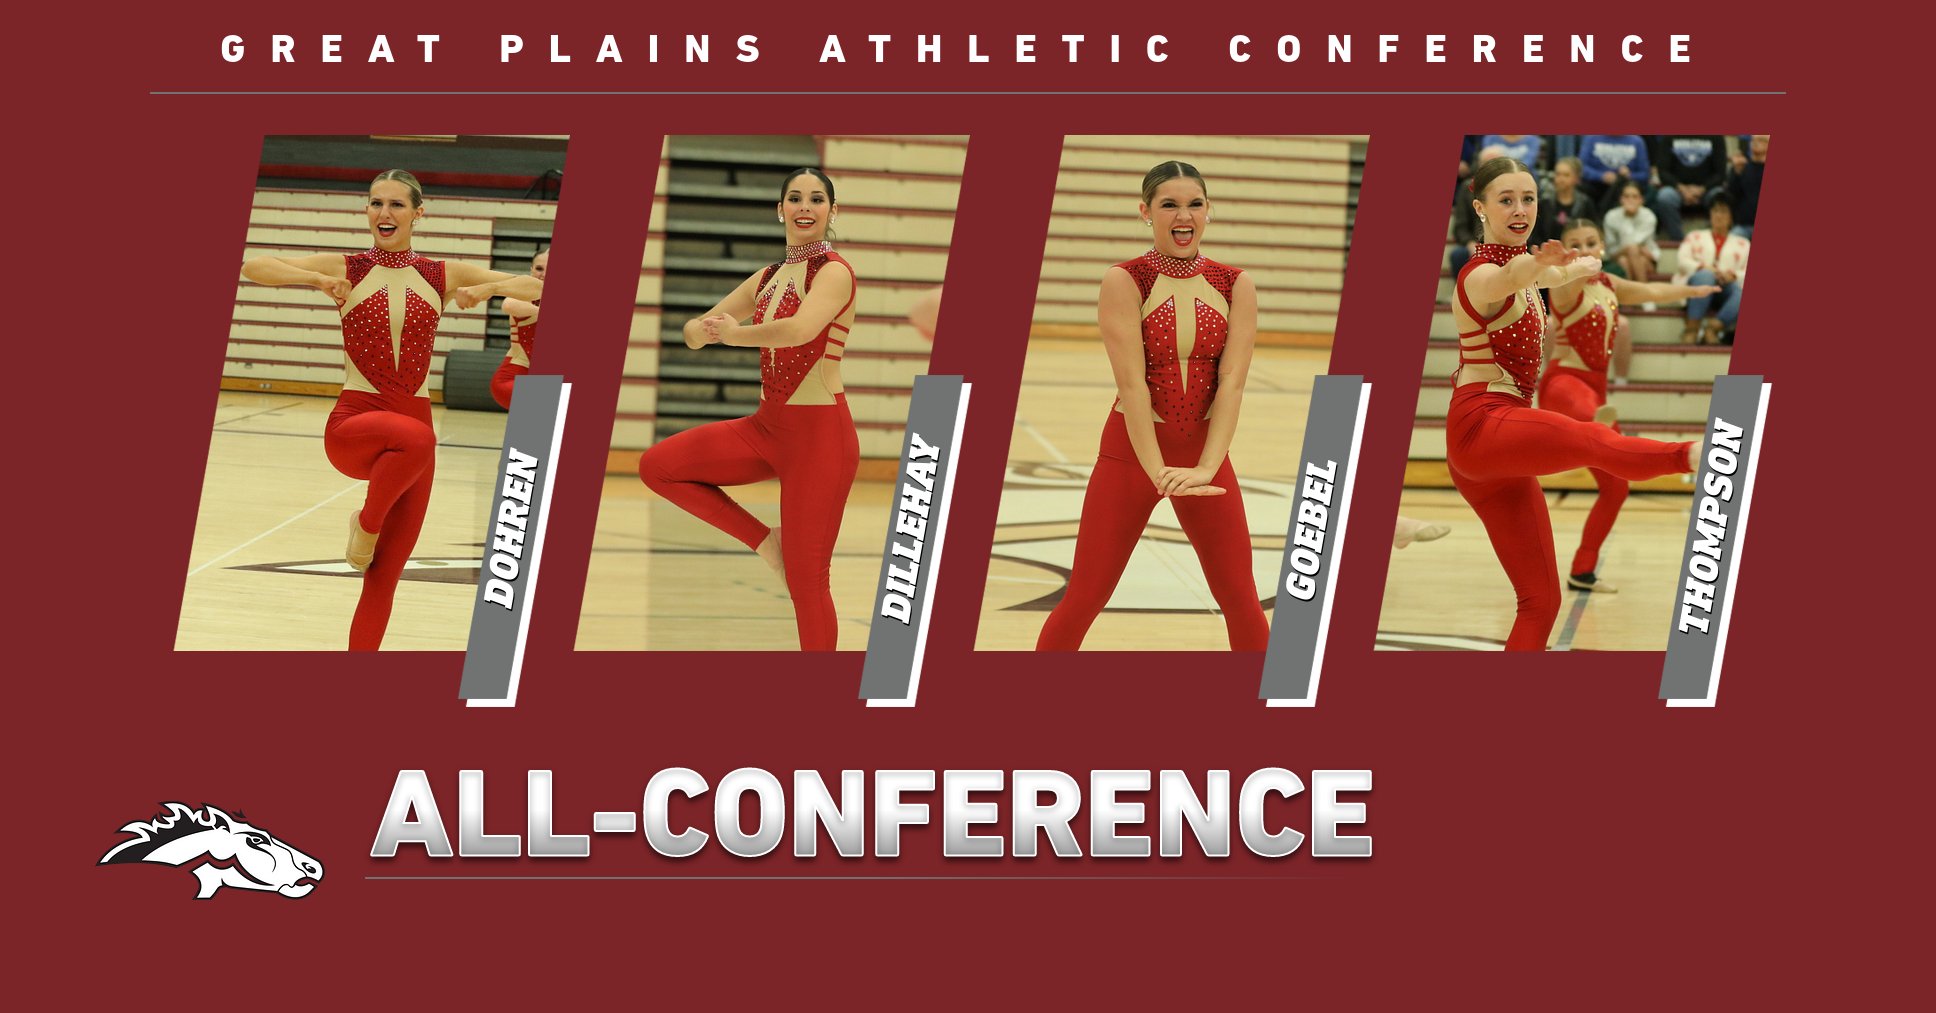 Four Mustangs named all-conference Thursday